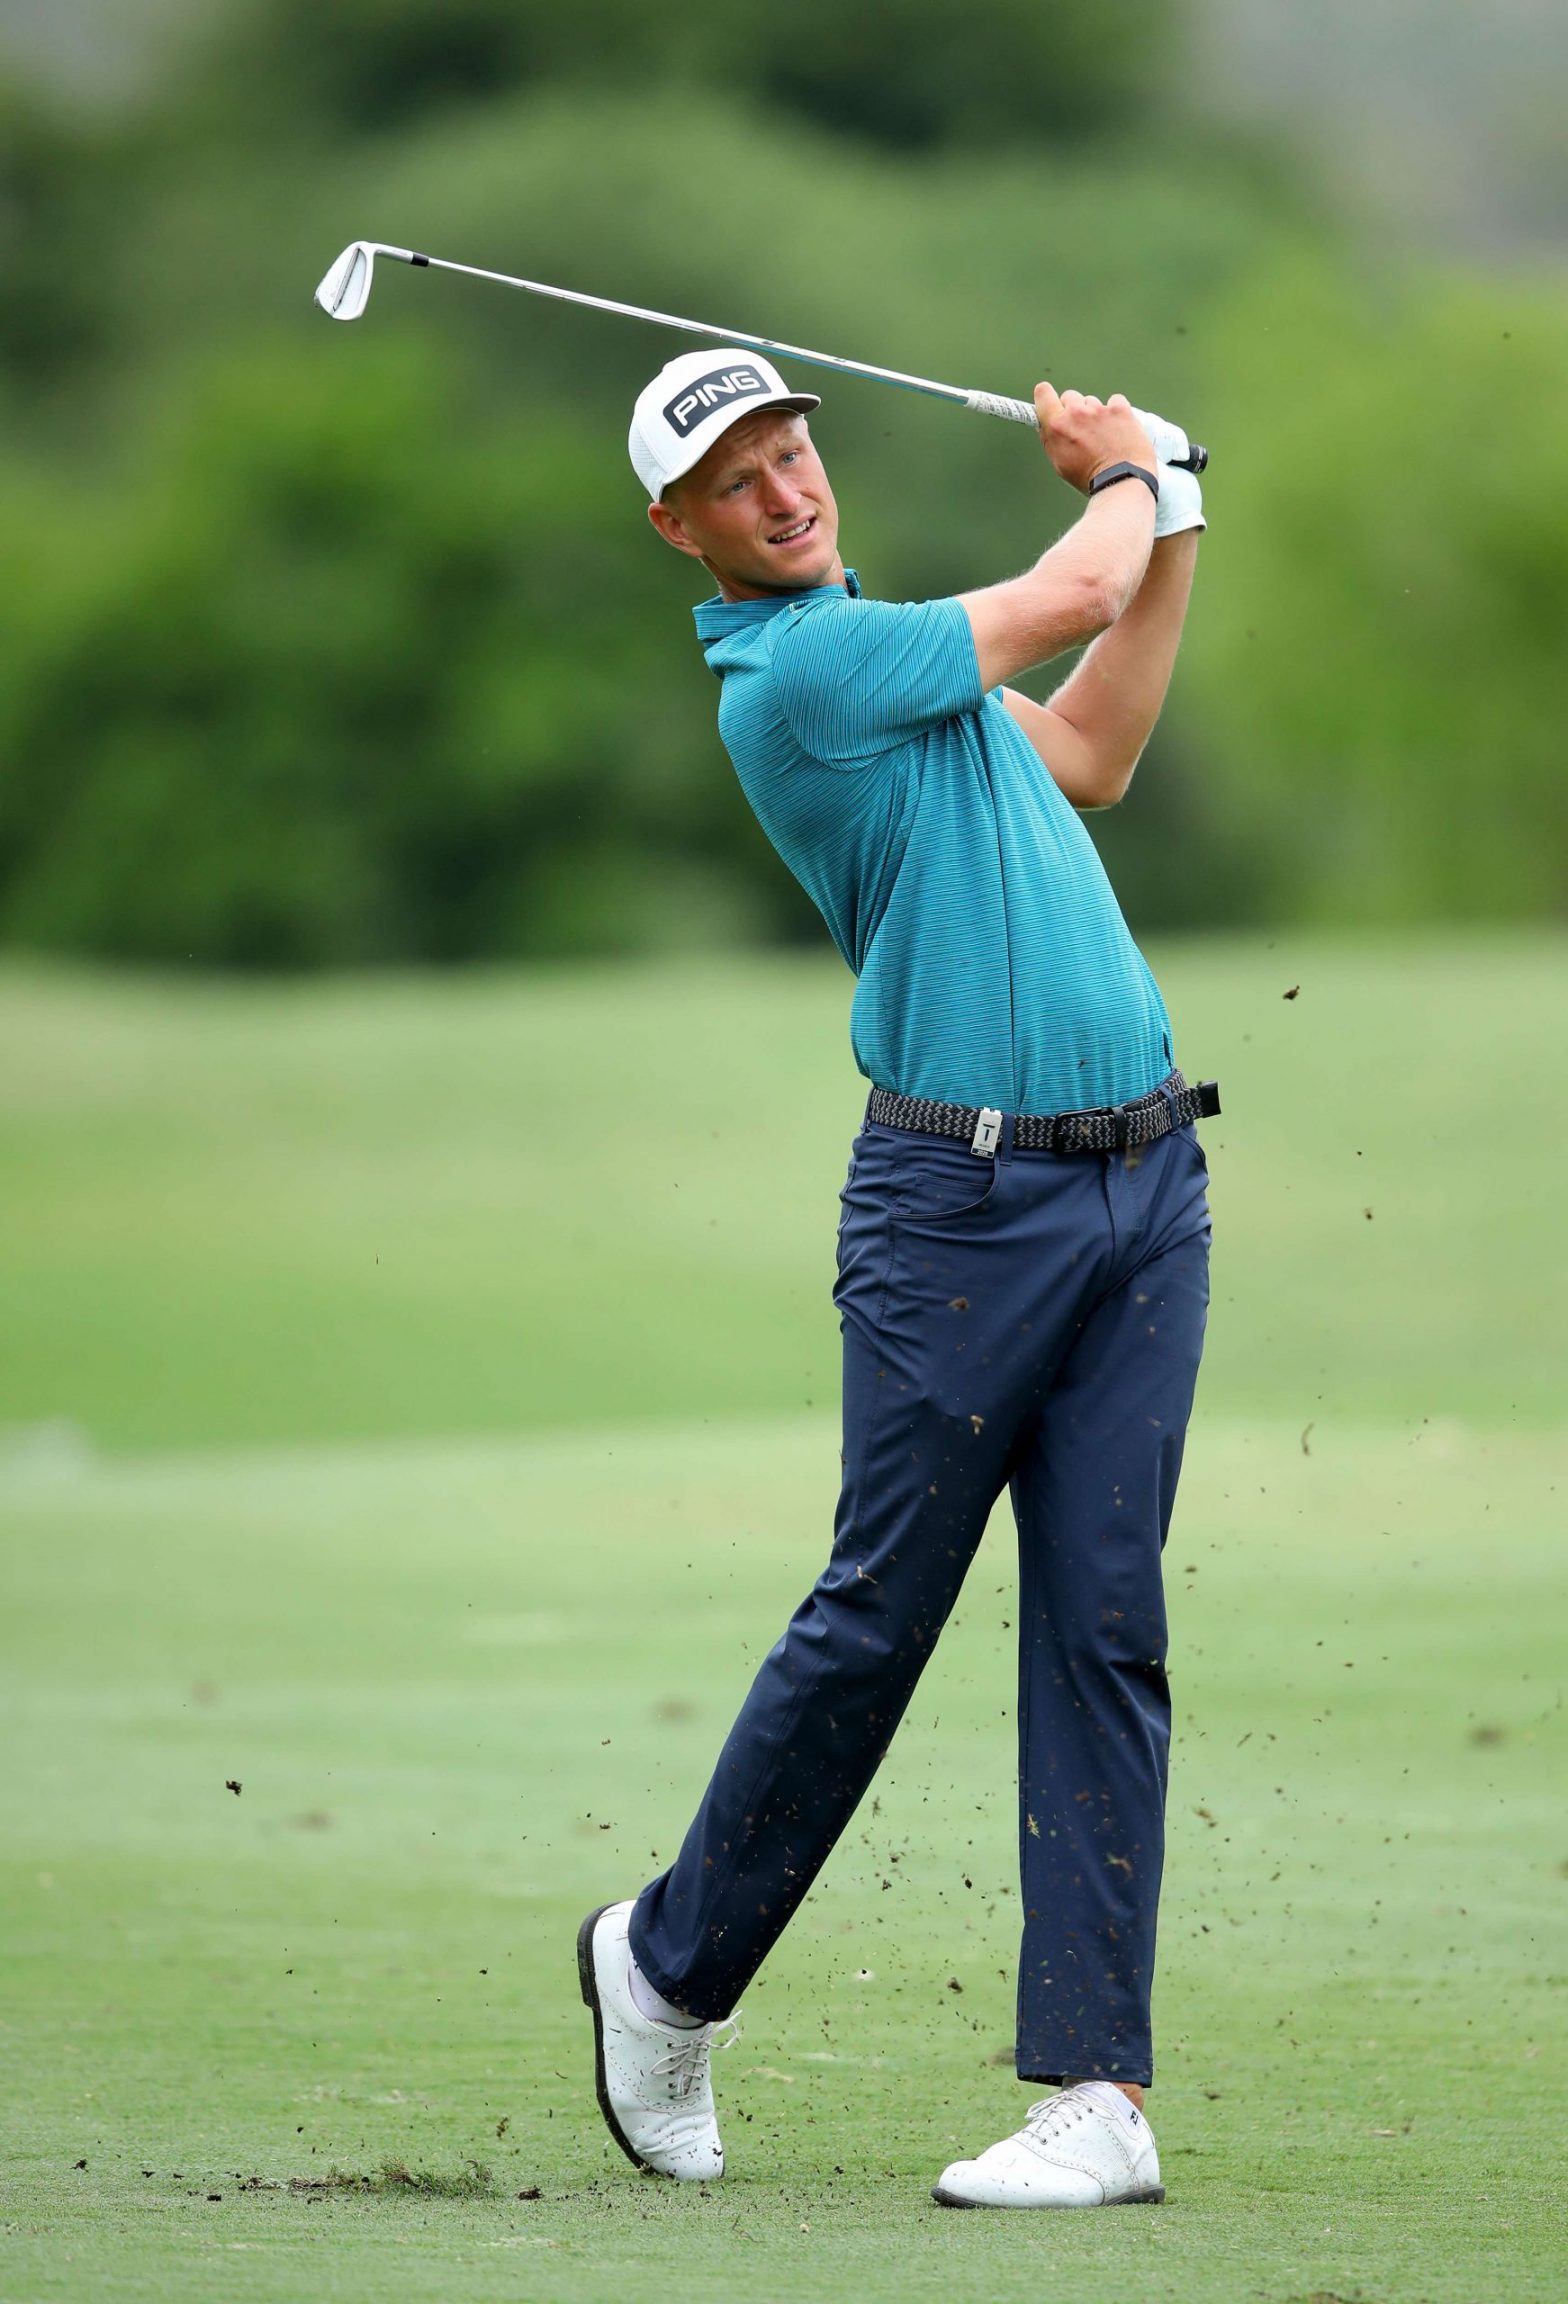 Meronk in pole position at Leopard Creek